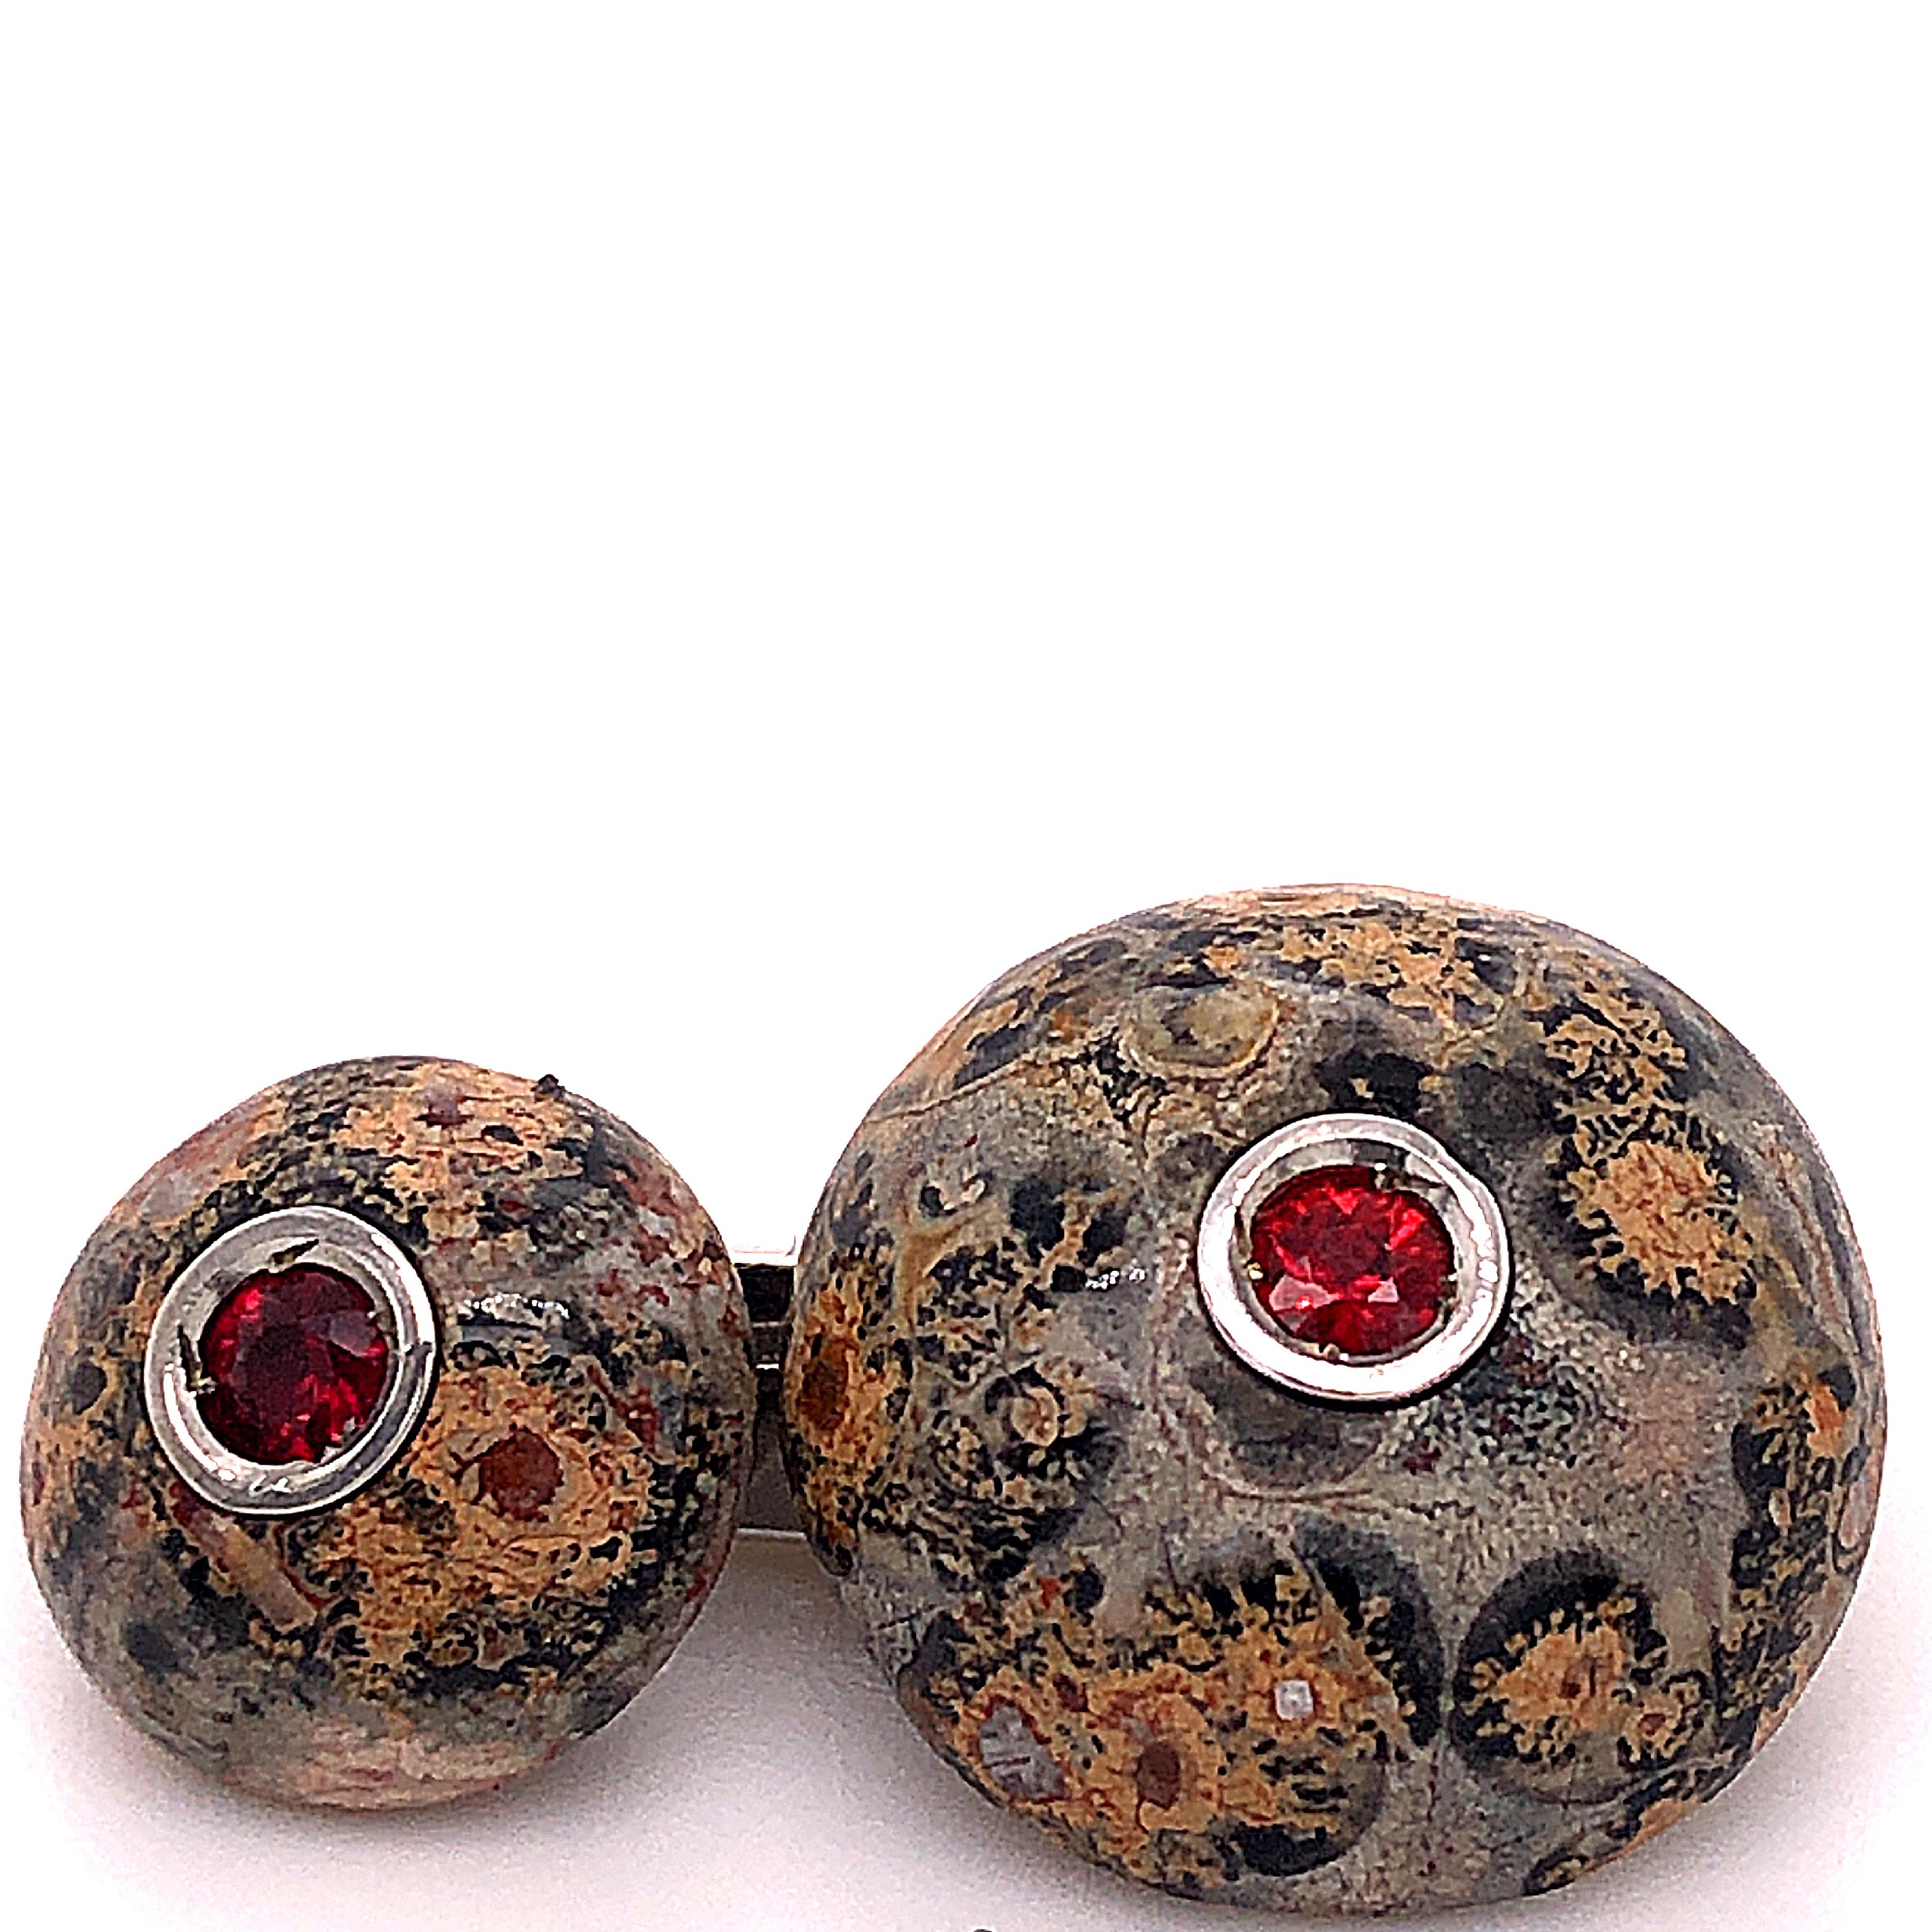 Absolutely Chic, Classy yet Timeless Cufflinks featuring 0.33 Kt, 4 natural red ruby brilliant cut in a Round Shaped, Hand Inlaid Natural Ocean Jasper Cabochon White Gold Setting.
In our Tobacco Leather Case and Pouch.